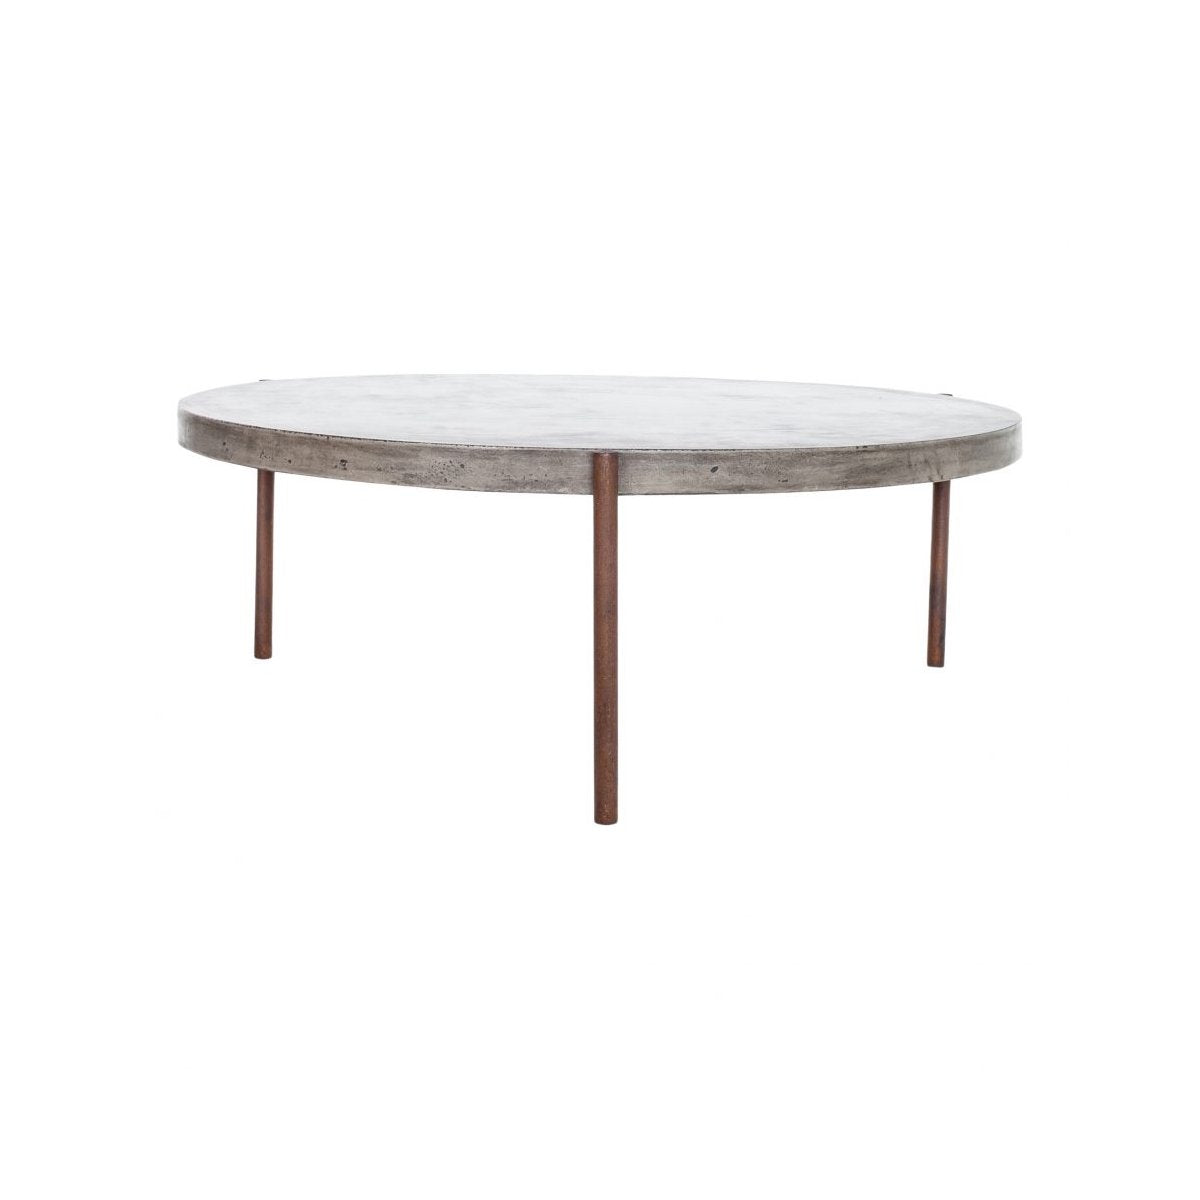 Mendez Outdoor Coffee Table Coffee Tables Moe's     Four Hands, Burke Decor, Mid Century Modern Furniture, Old Bones Furniture Company, Old Bones Co, Modern Mid Century, Designer Furniture, https://www.oldbonesco.com/